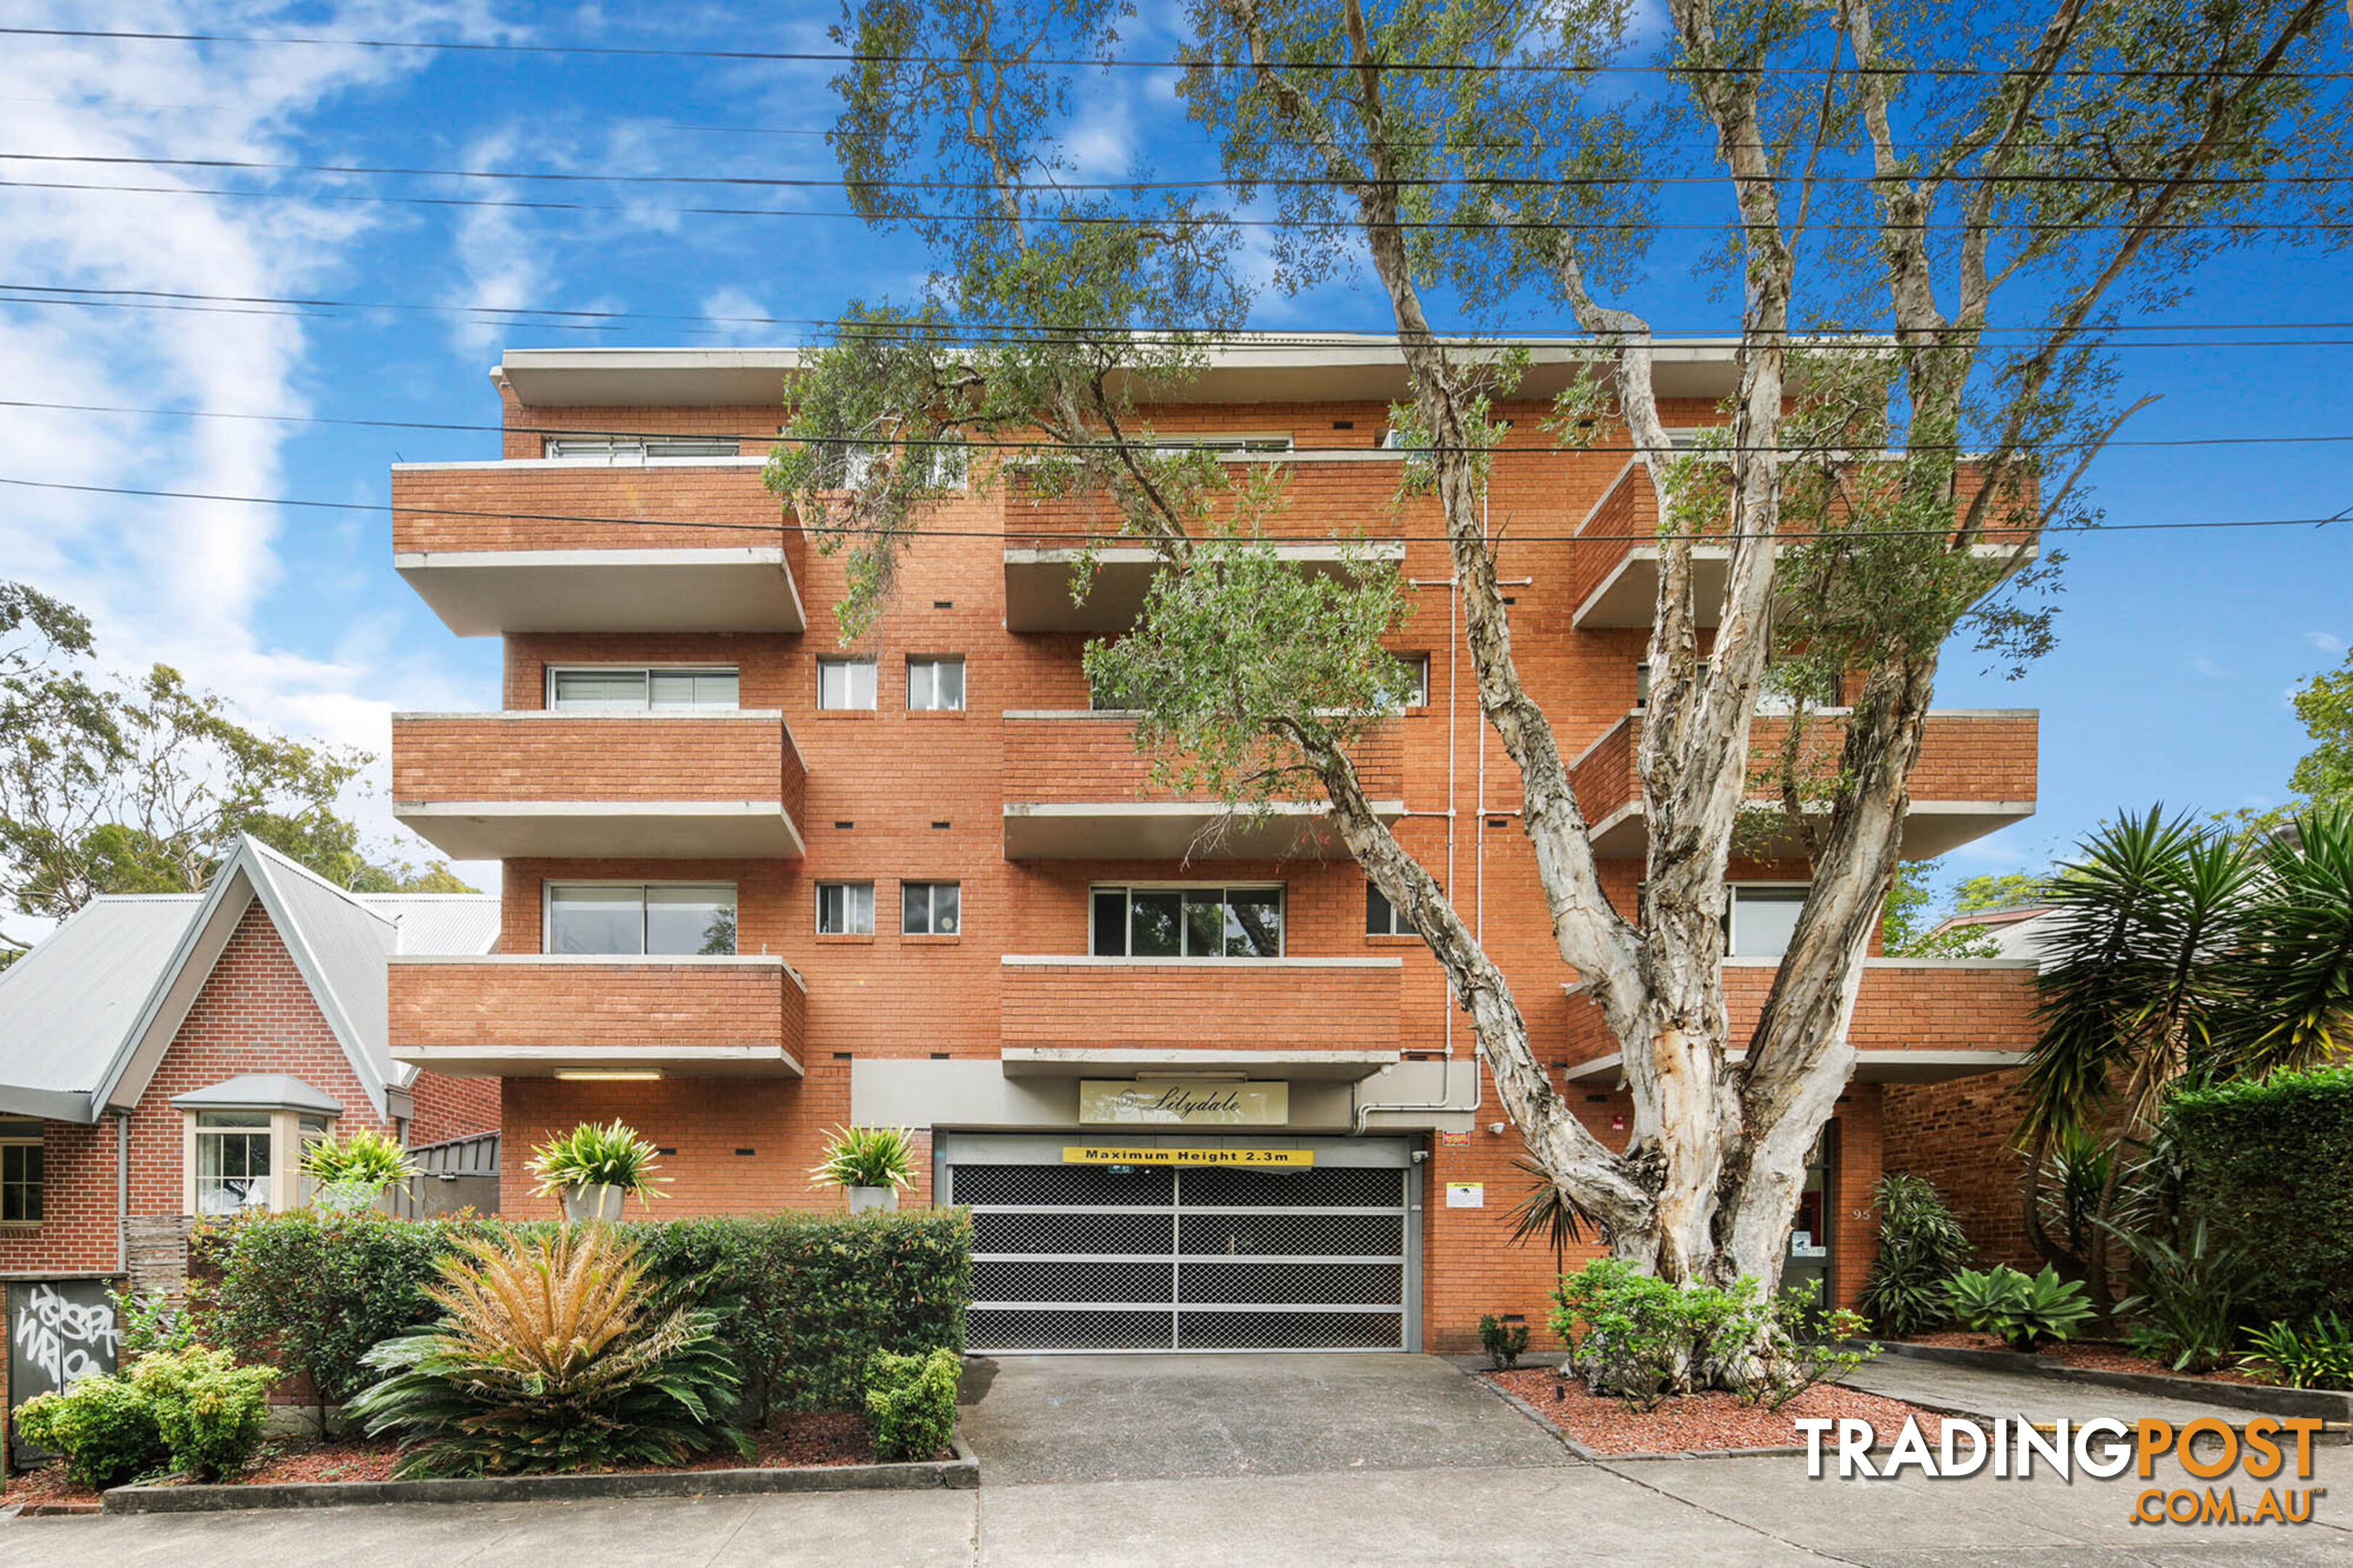 71/95 Annandale Street ANNANDALE NSW 2038